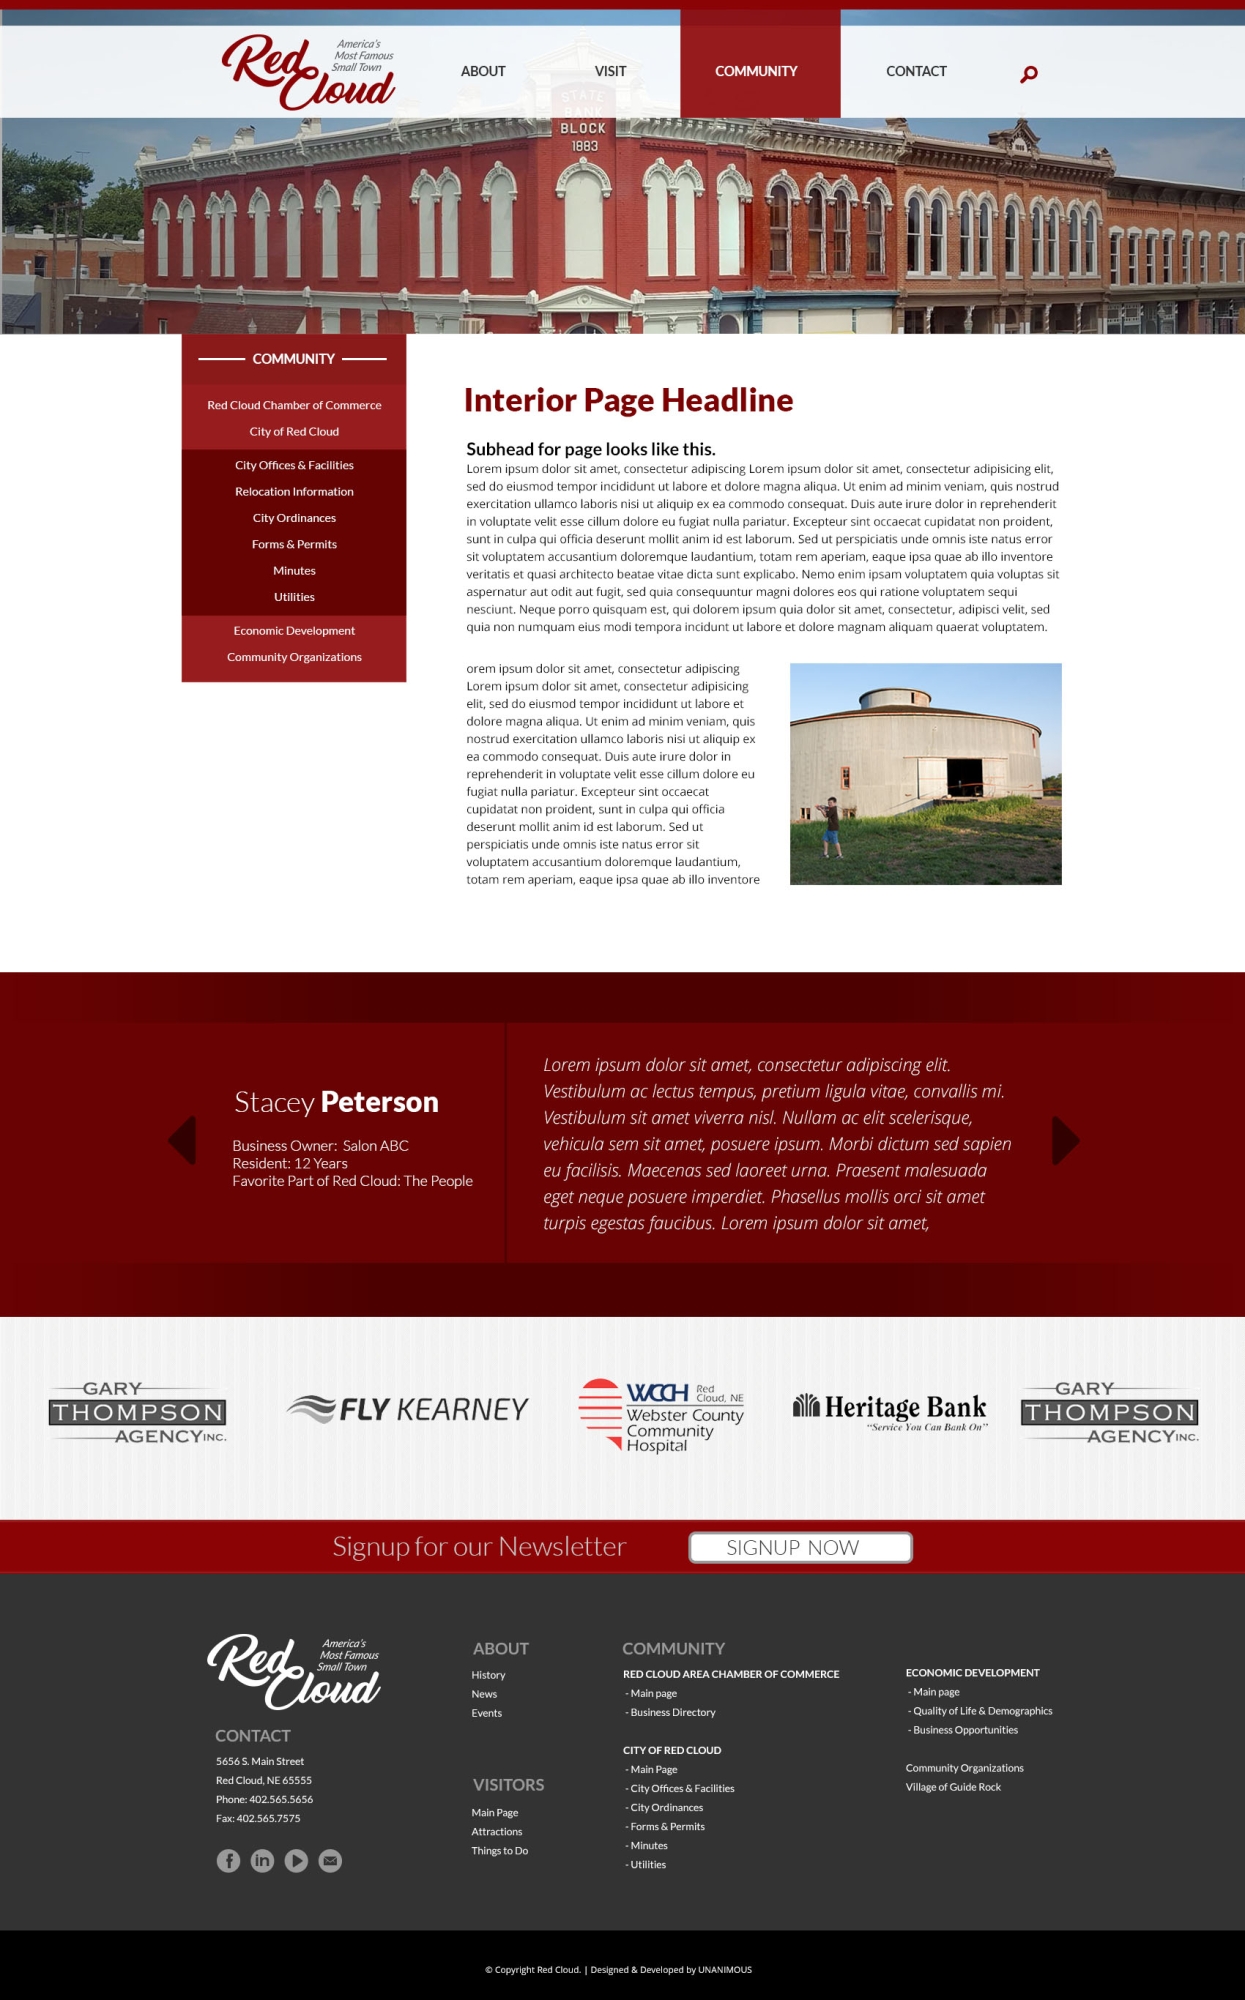 red cloud community website design about page